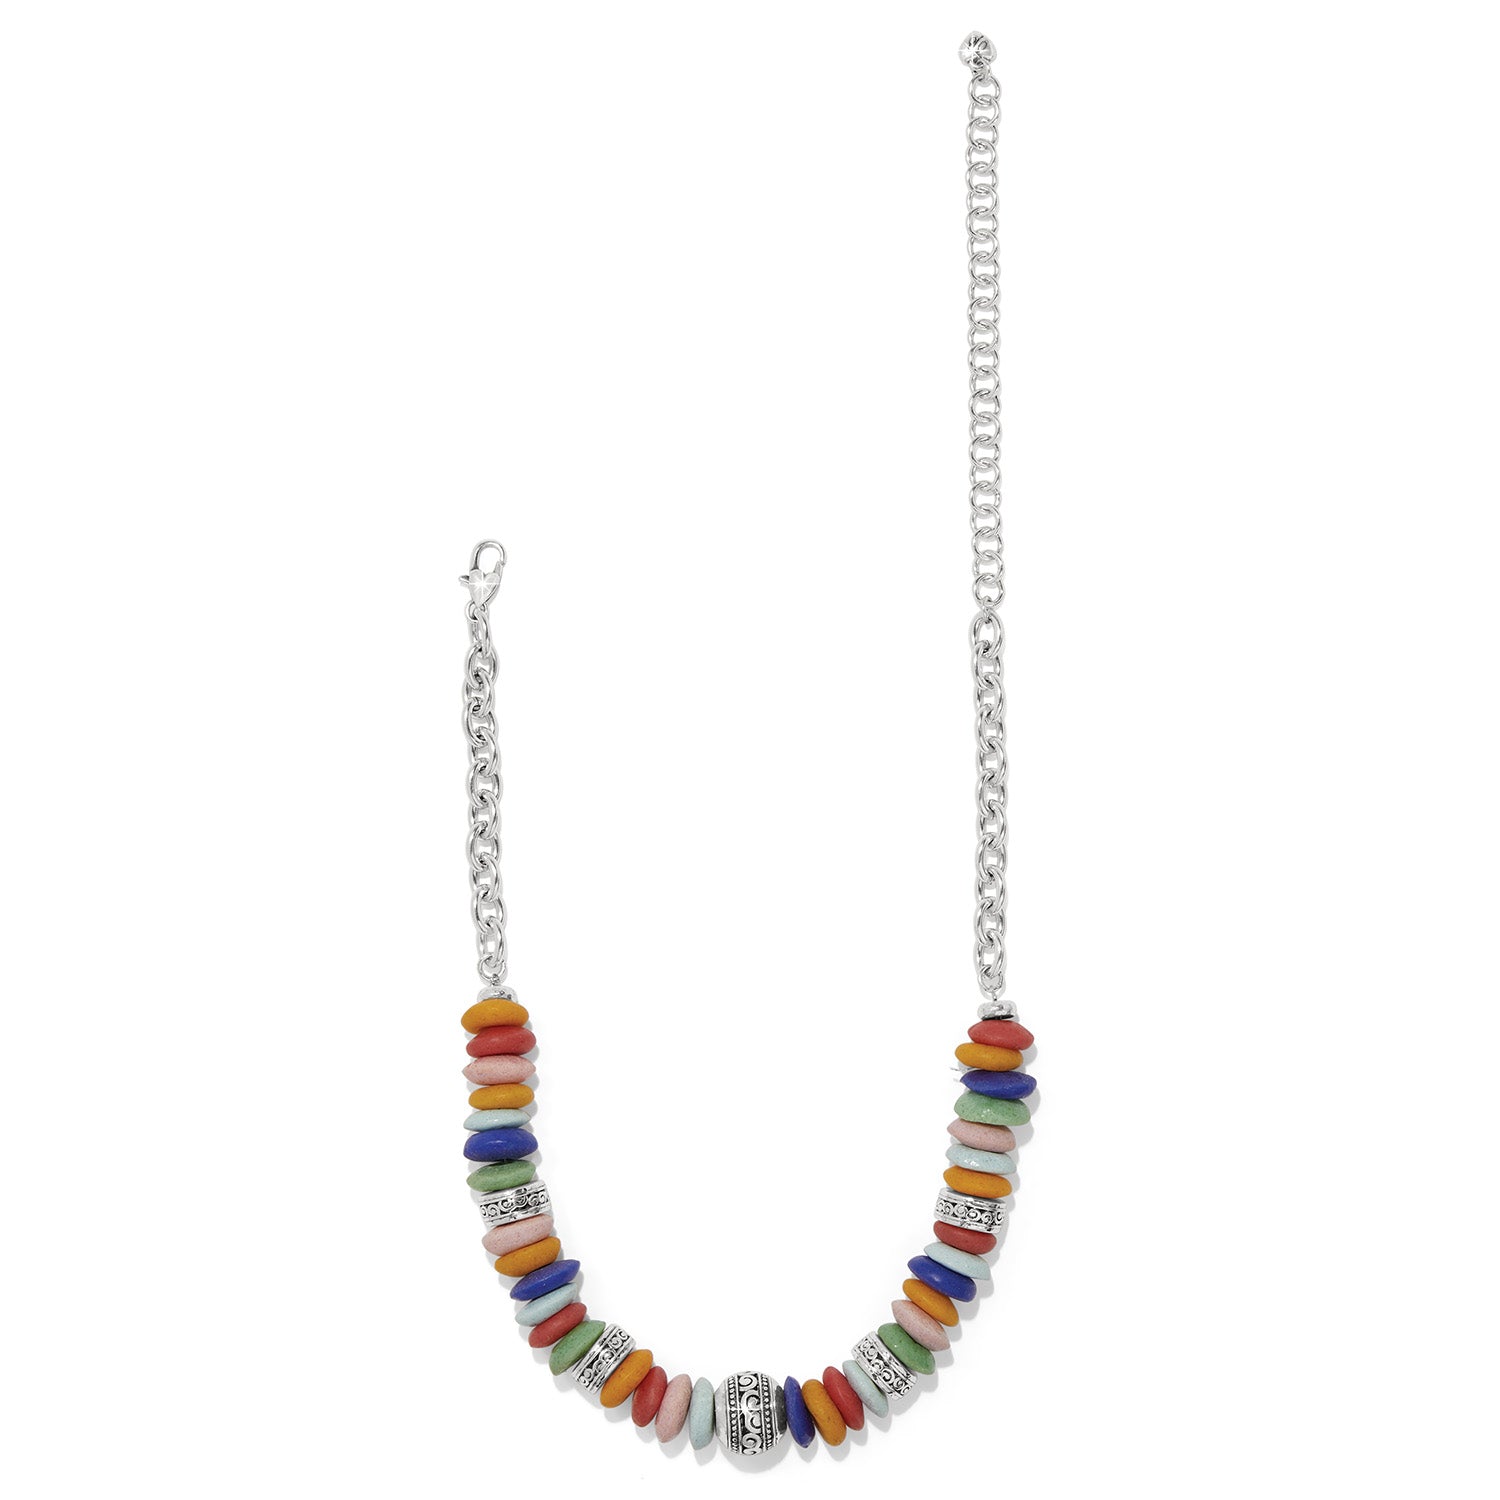 Mingle Medley Beaded Sphere Necklace